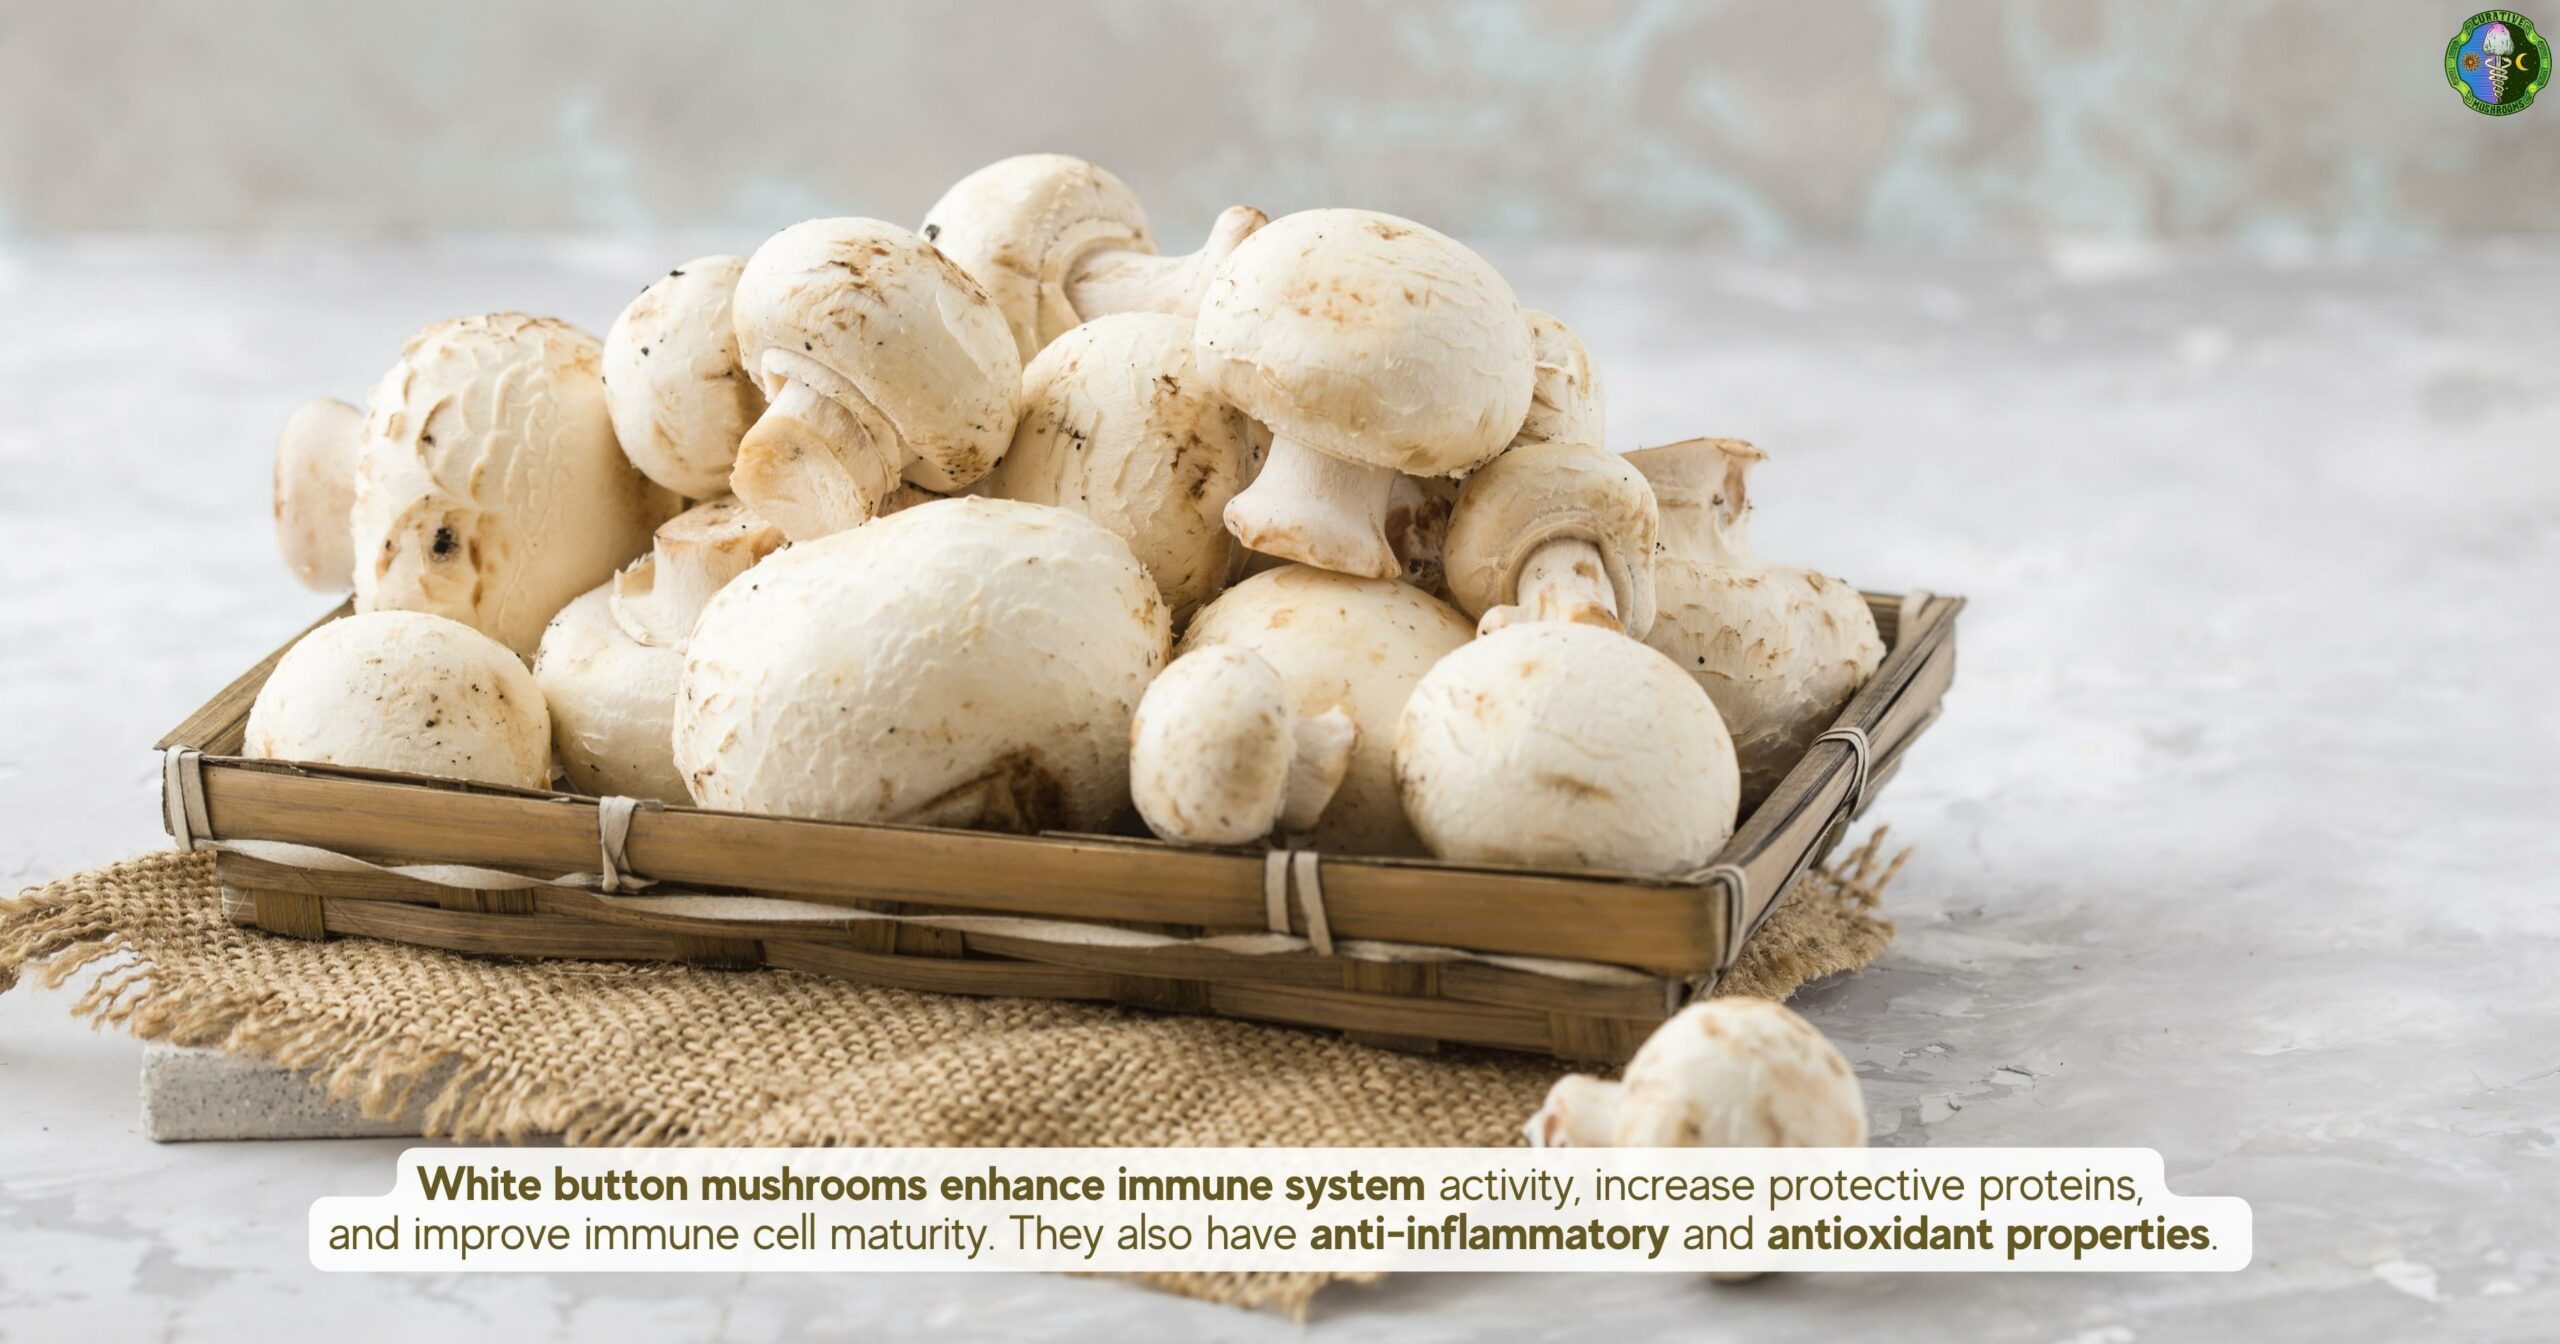 Health Benefits of White Button Mushrooms - enhance immune system activity, increase protective proteins, anti-inflammatory and antioxidant properties